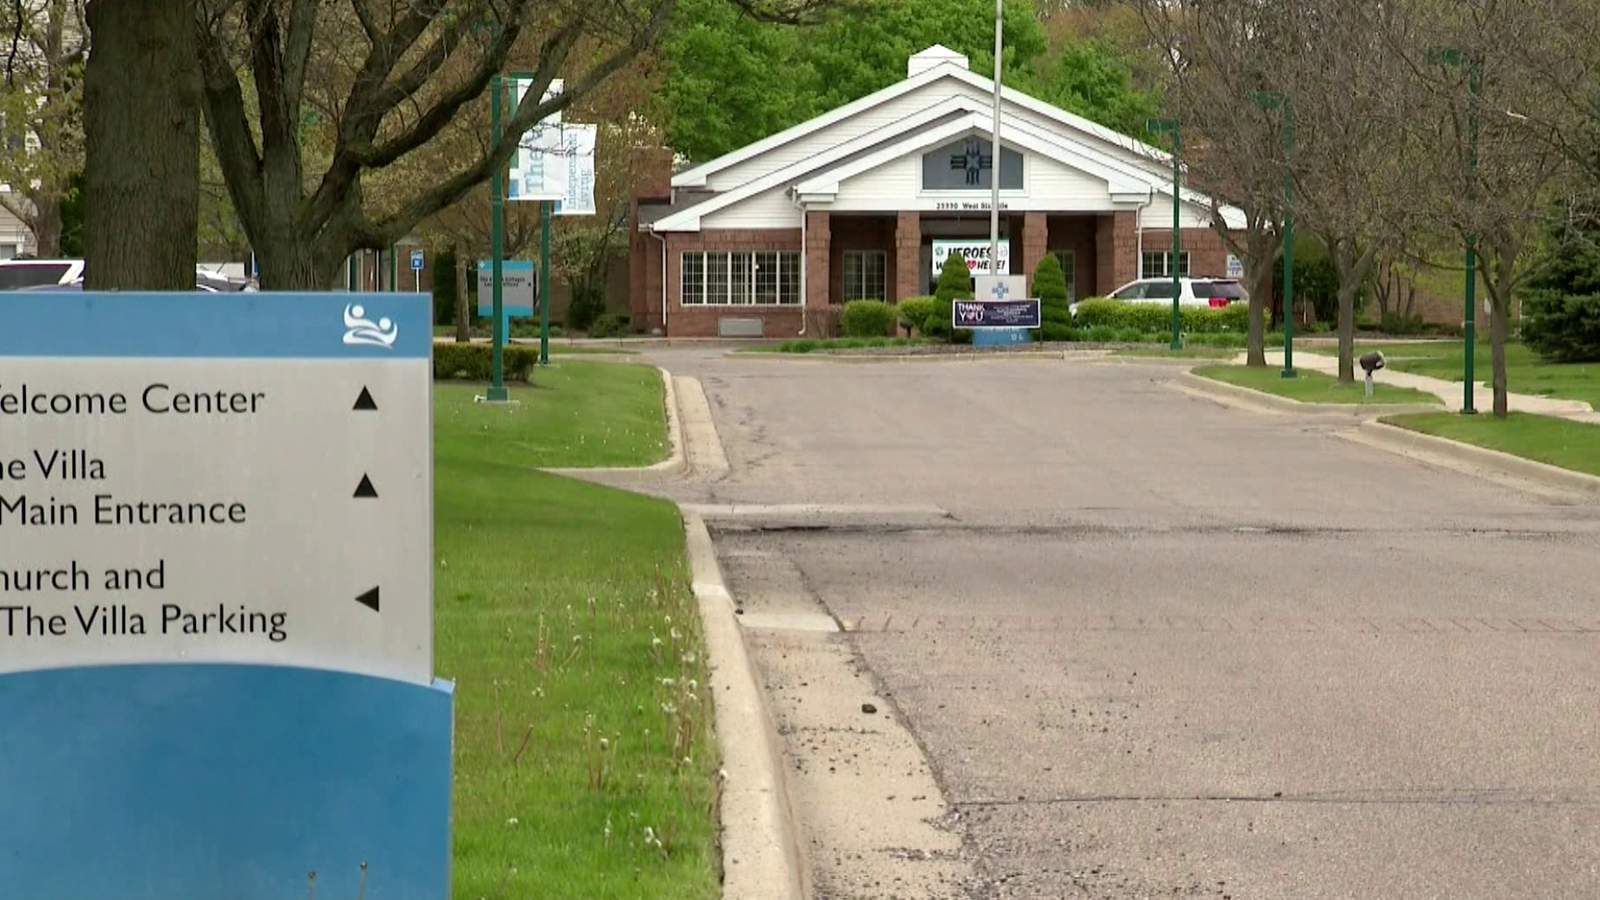 Michigan considers change to controversial nursing home policy